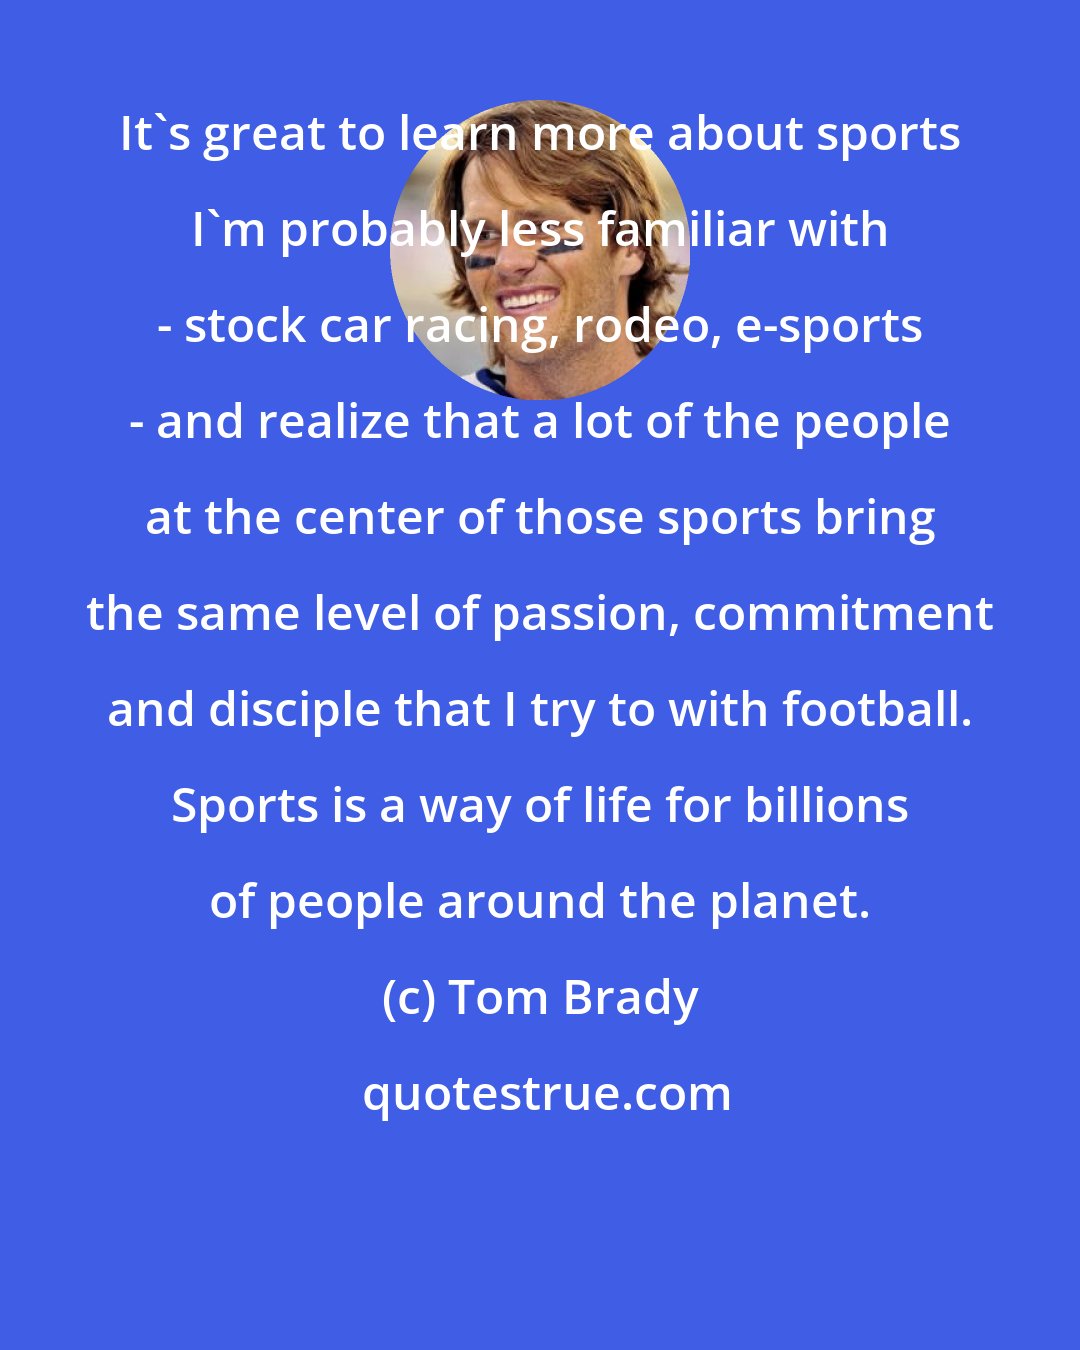 Tom Brady: It's great to learn more about sports I'm probably less familiar with - stock car racing, rodeo, e-sports - and realize that a lot of the people at the center of those sports bring the same level of passion, commitment and disciple that I try to with football. Sports is a way of life for billions of people around the planet.